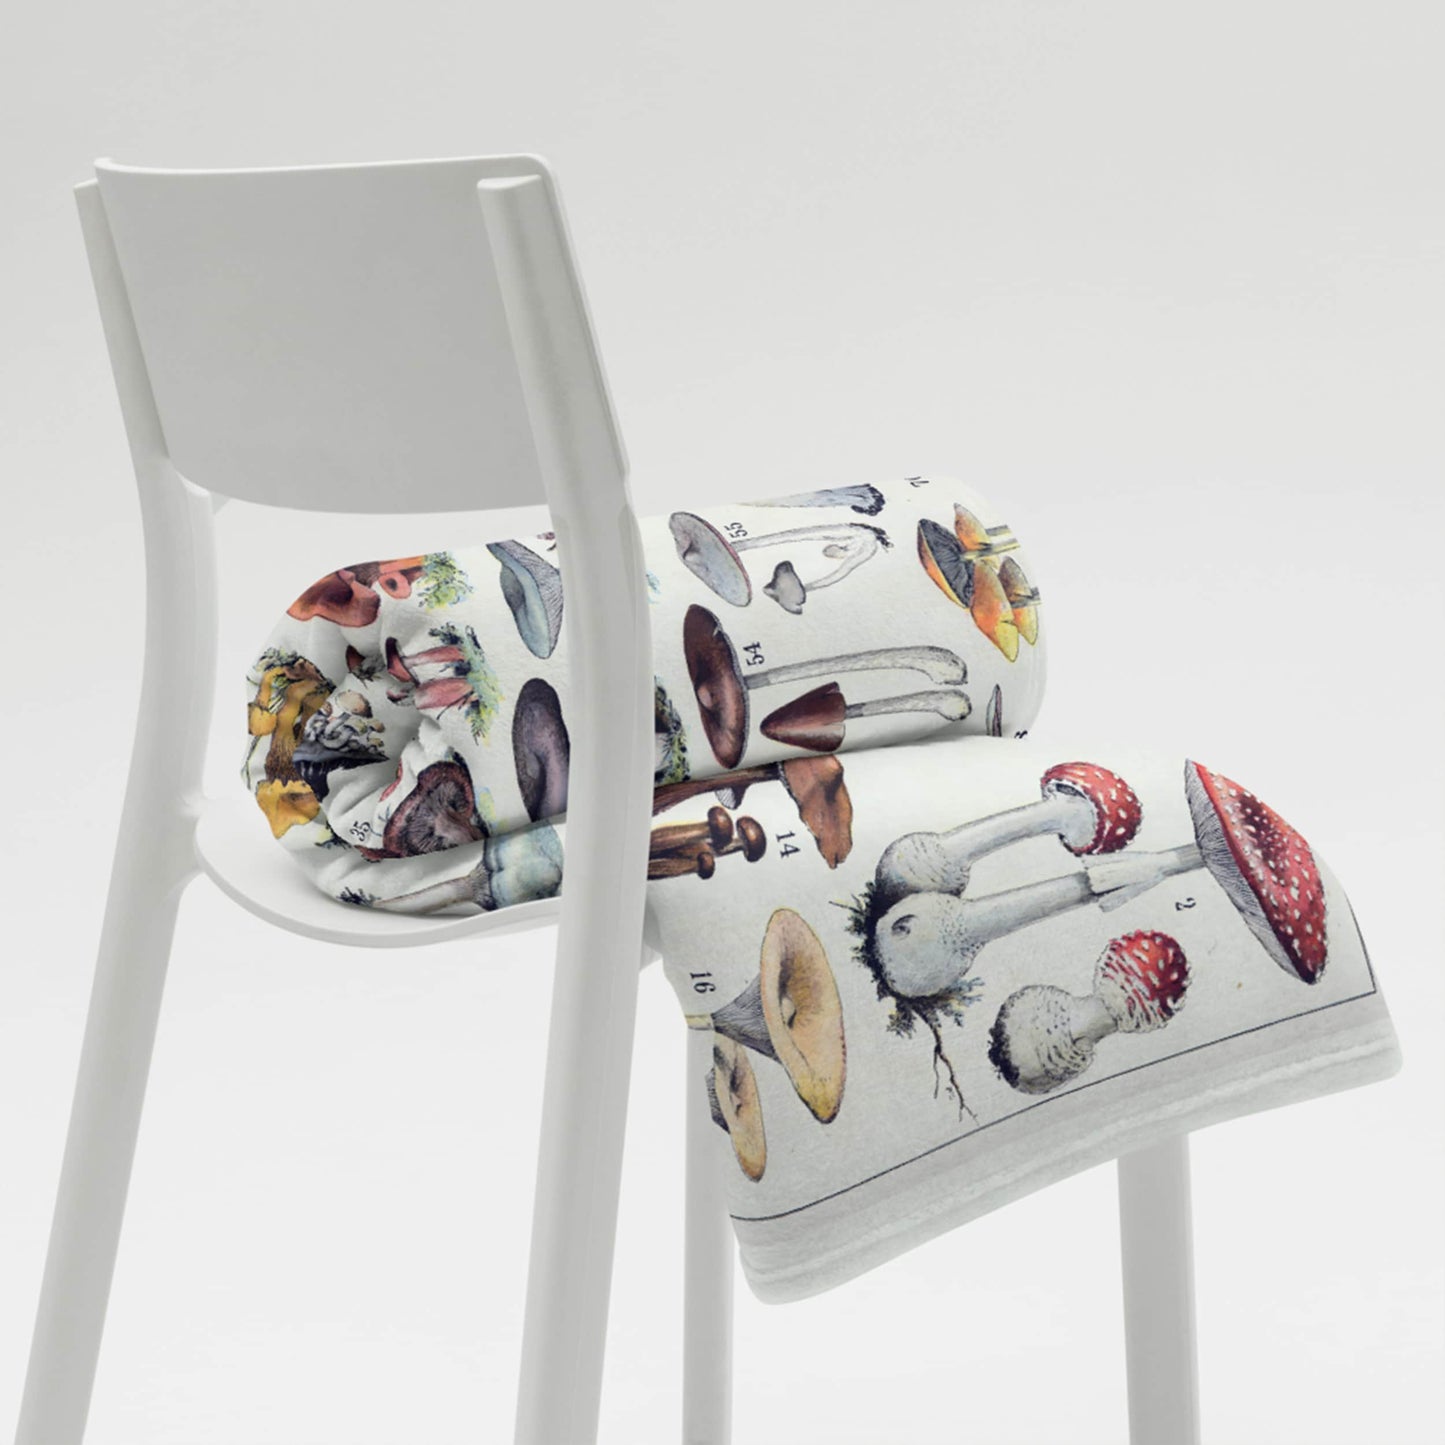 A modern white chair presenting a rolled-up fleece blanket with a detailed, colorful print of various mushrooms, juxtaposing contemporary furniture design with naturalistic elements